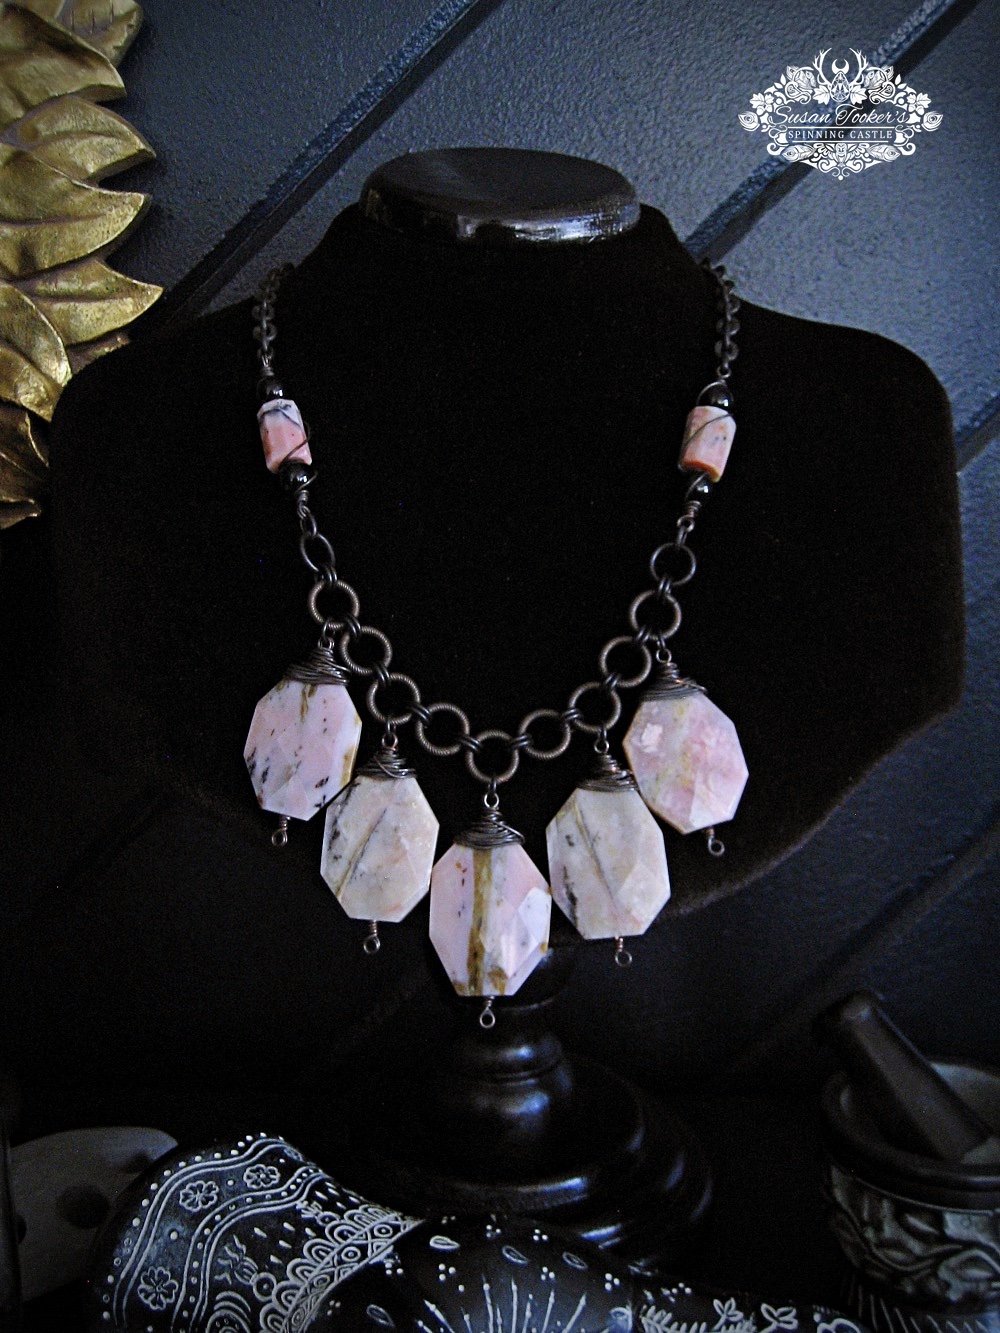 Image of HEART STONE - Pink Opal Bib Statement Necklace Boho Rustic Witchy Jewelry 